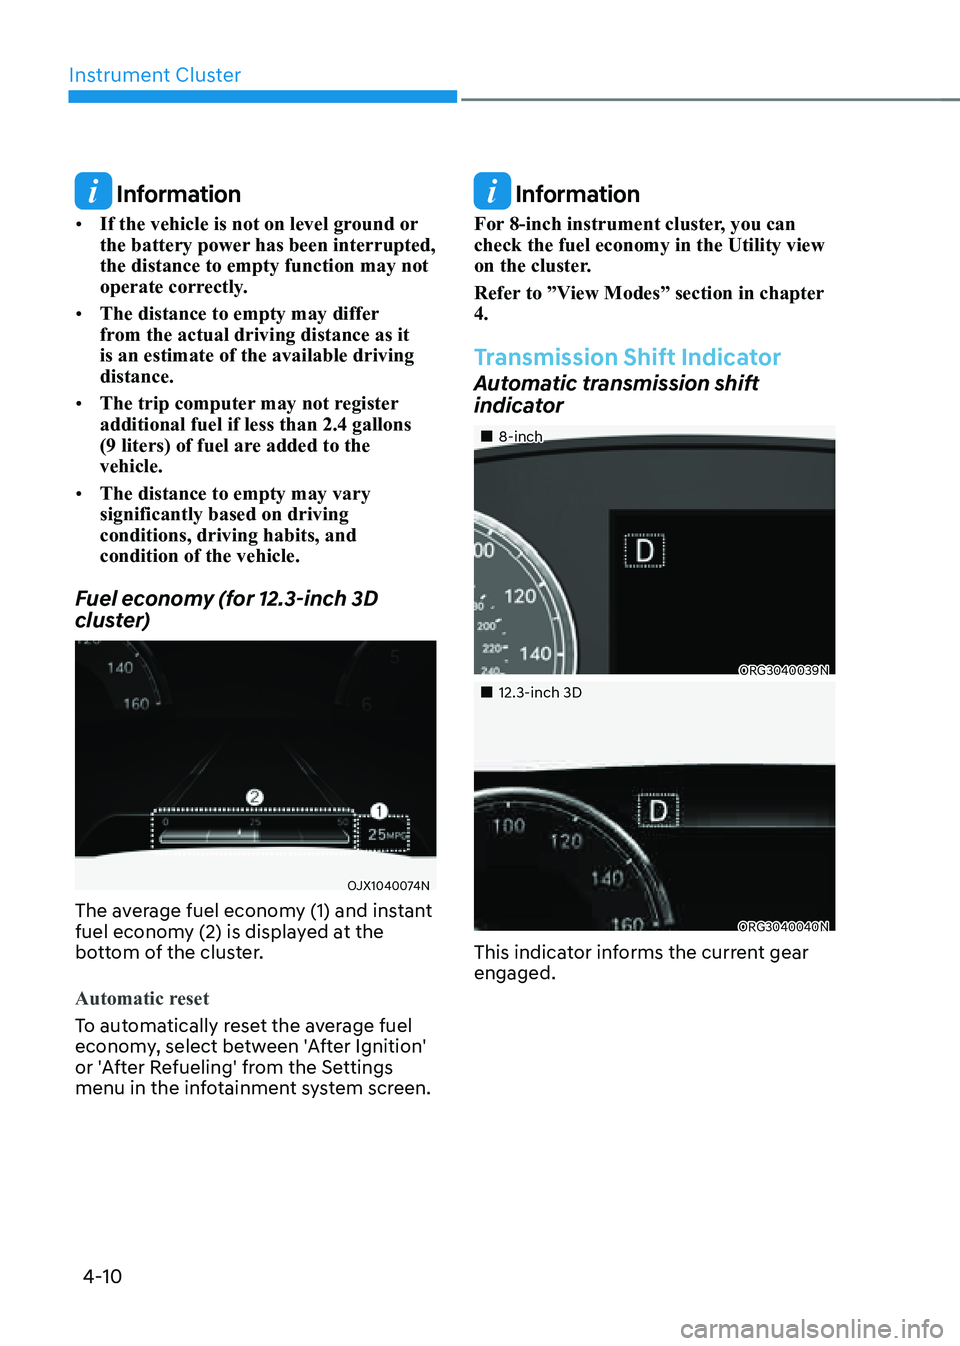 GENESIS GV80 2021  Owners Manual Instrument Cluster
4-10
 Information
• If the vehicle is not on level ground or 
the battery power has been interrupted, 
the distance to empty function may not 
operate correctly.
• The distance 